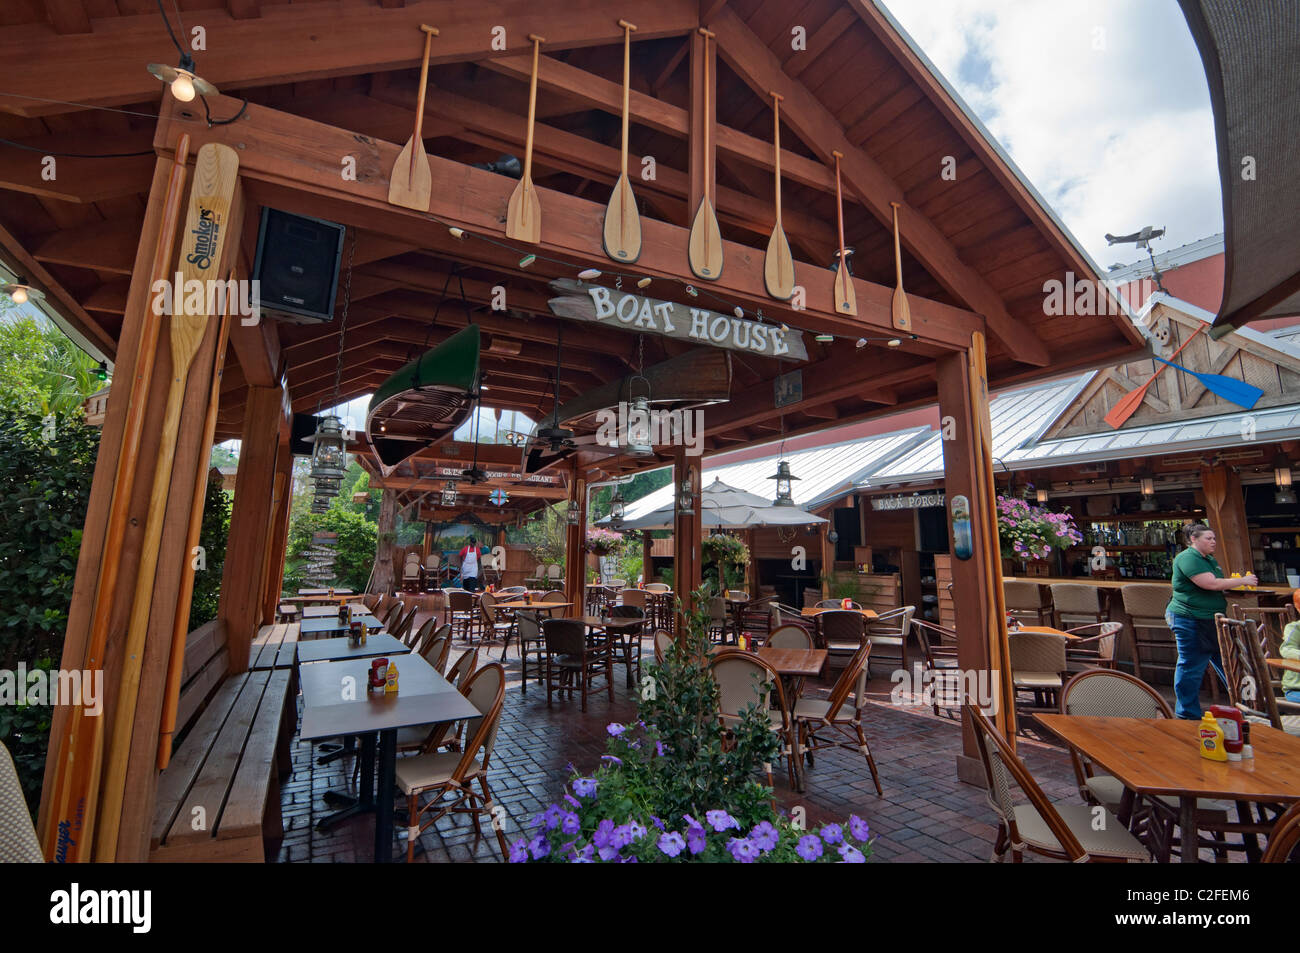 The Great Outdoors Restaurant outdoor patio area in High Springs Florida  Stock Photo - Alamy